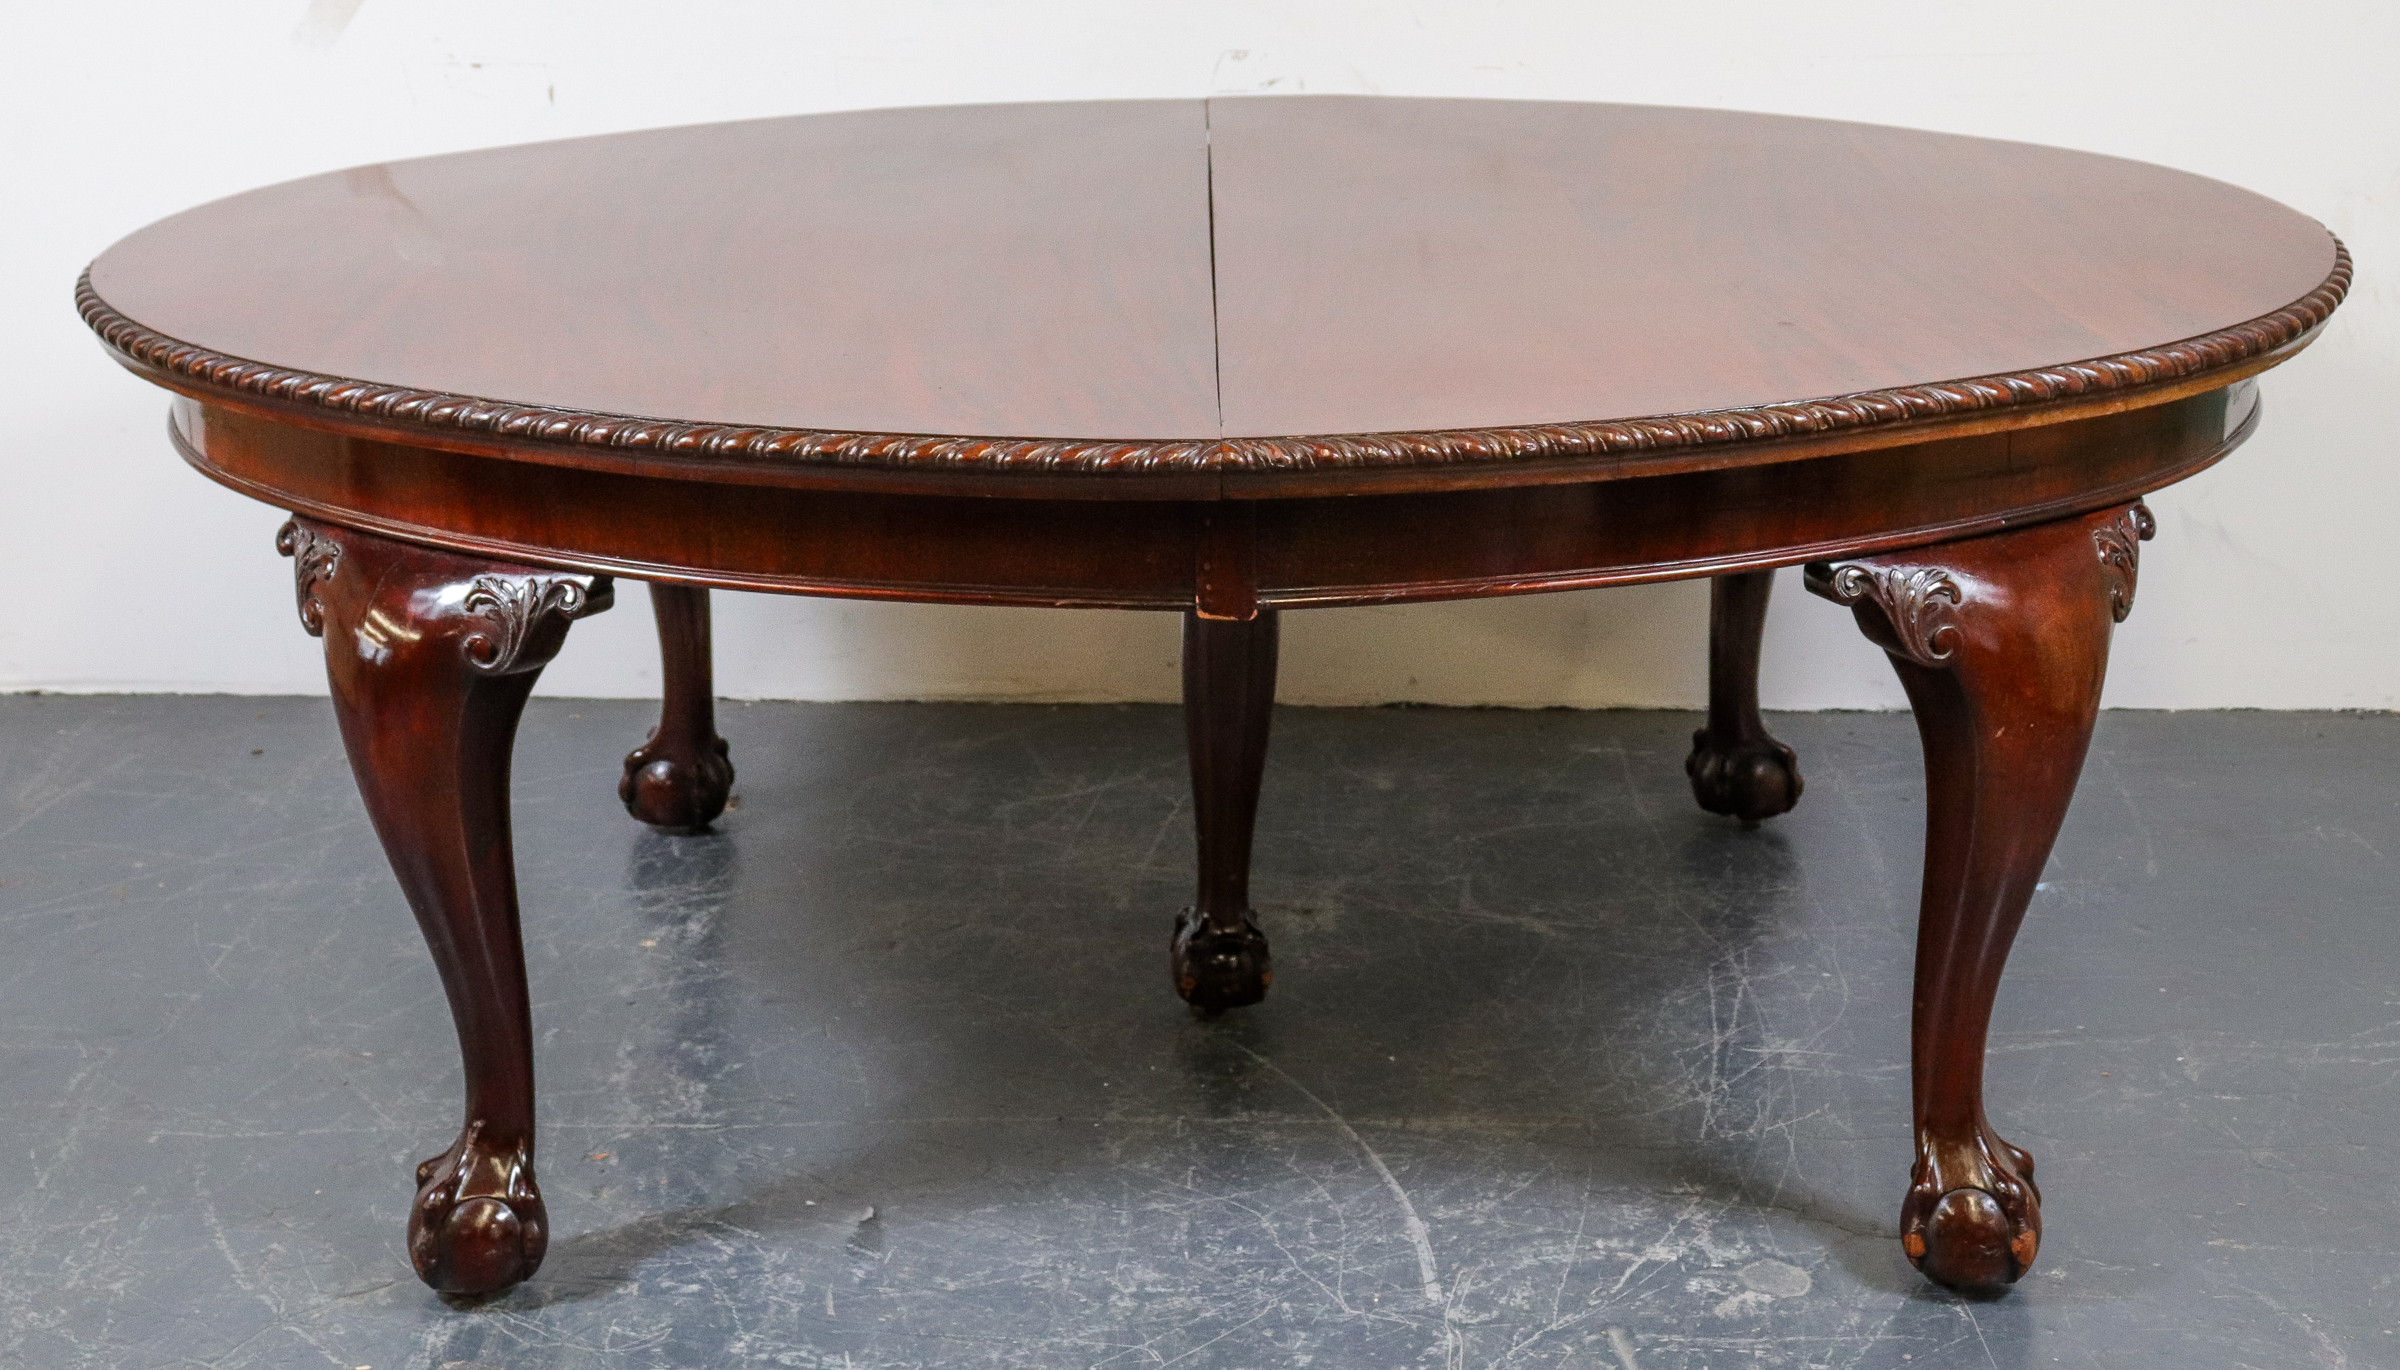 LARGE CHIPPENDALE OVAL DINING TABLE 3c330e